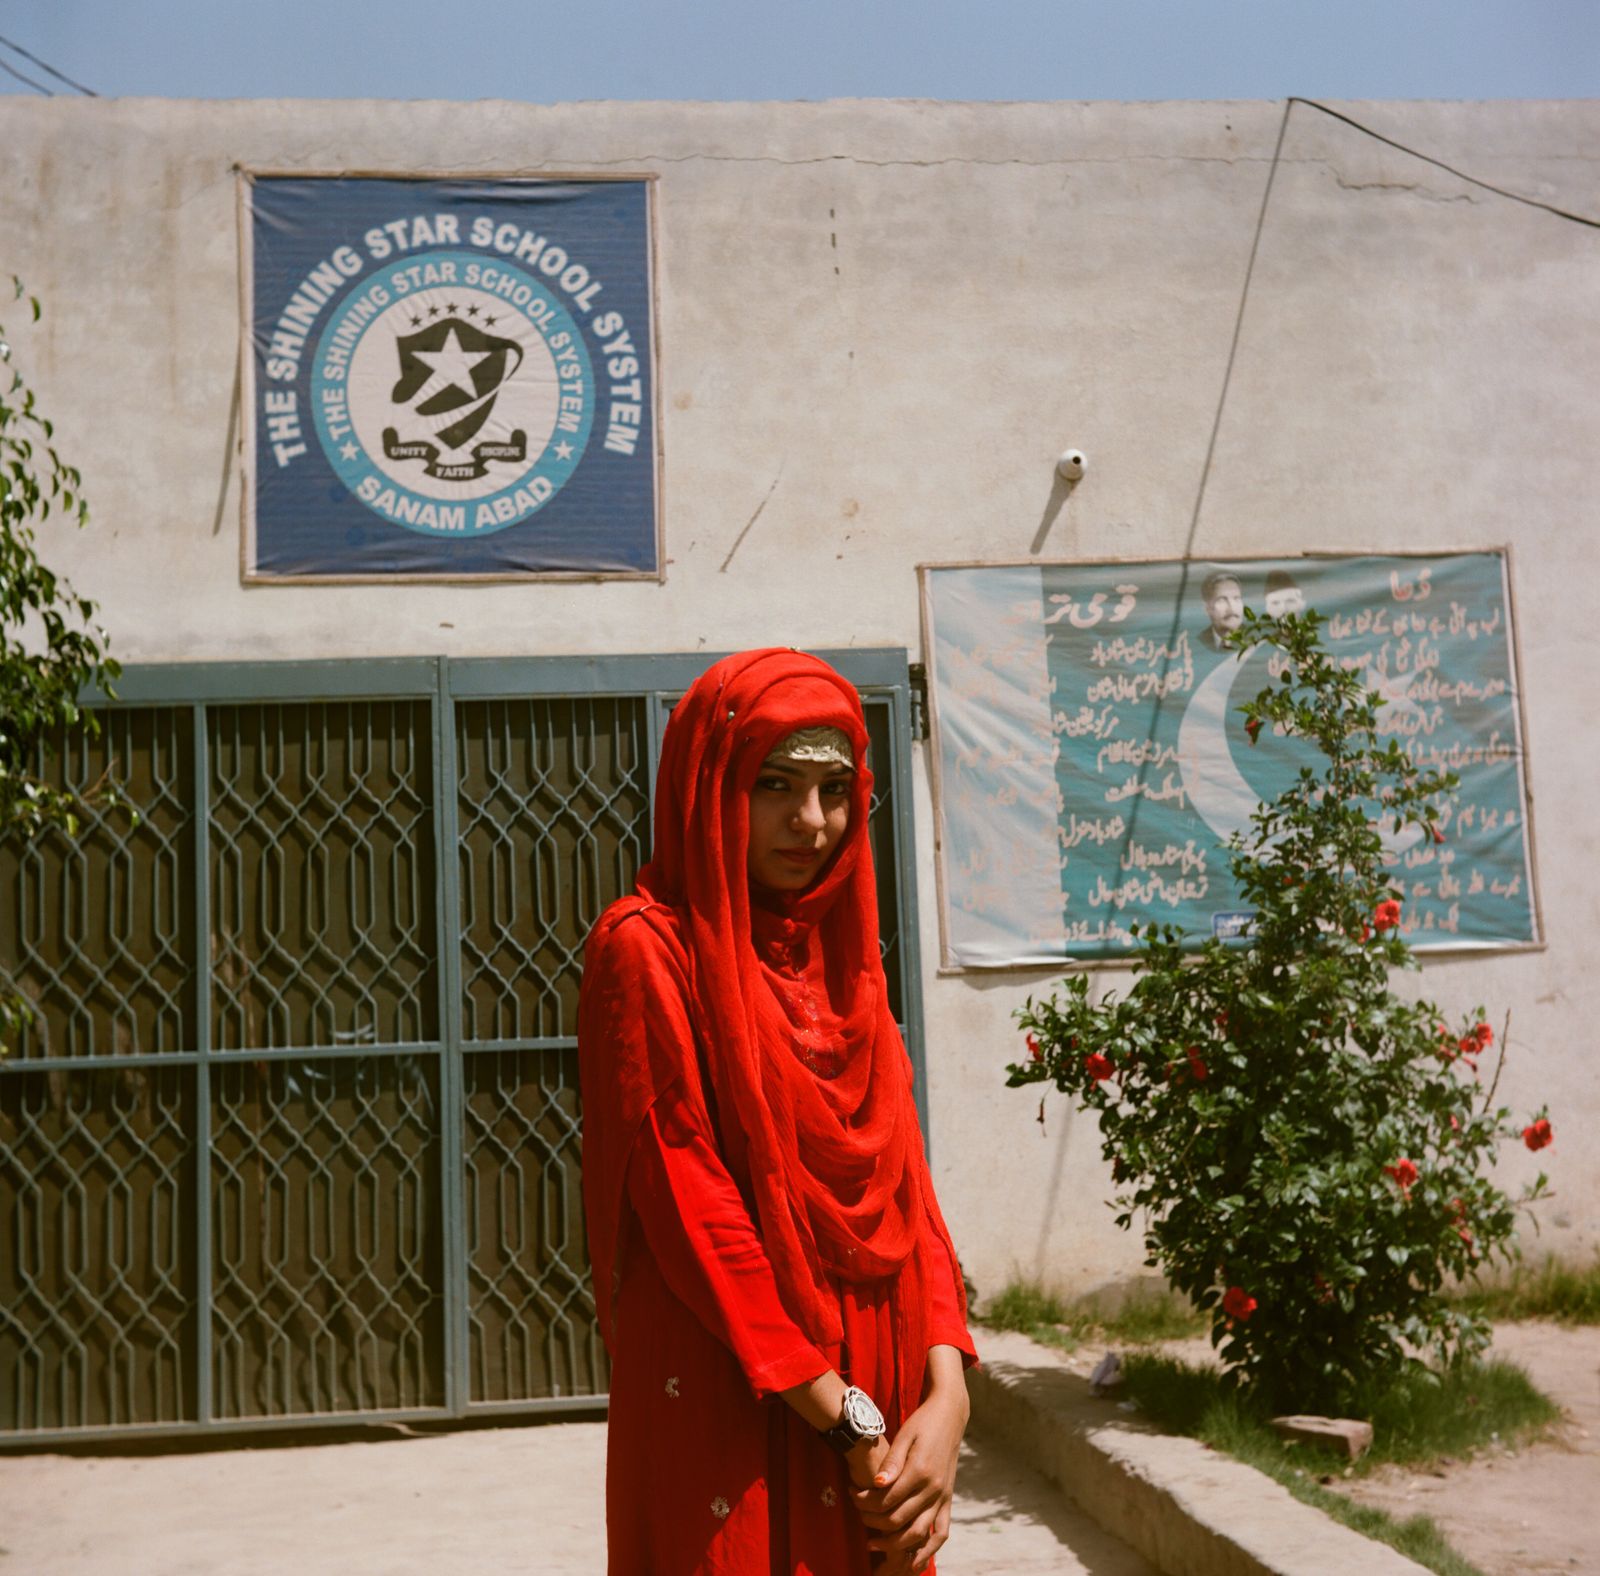 © Maryam Wahid - Image from the Ek Aurat Ka Safar (translating to: a woman's journey) photography project